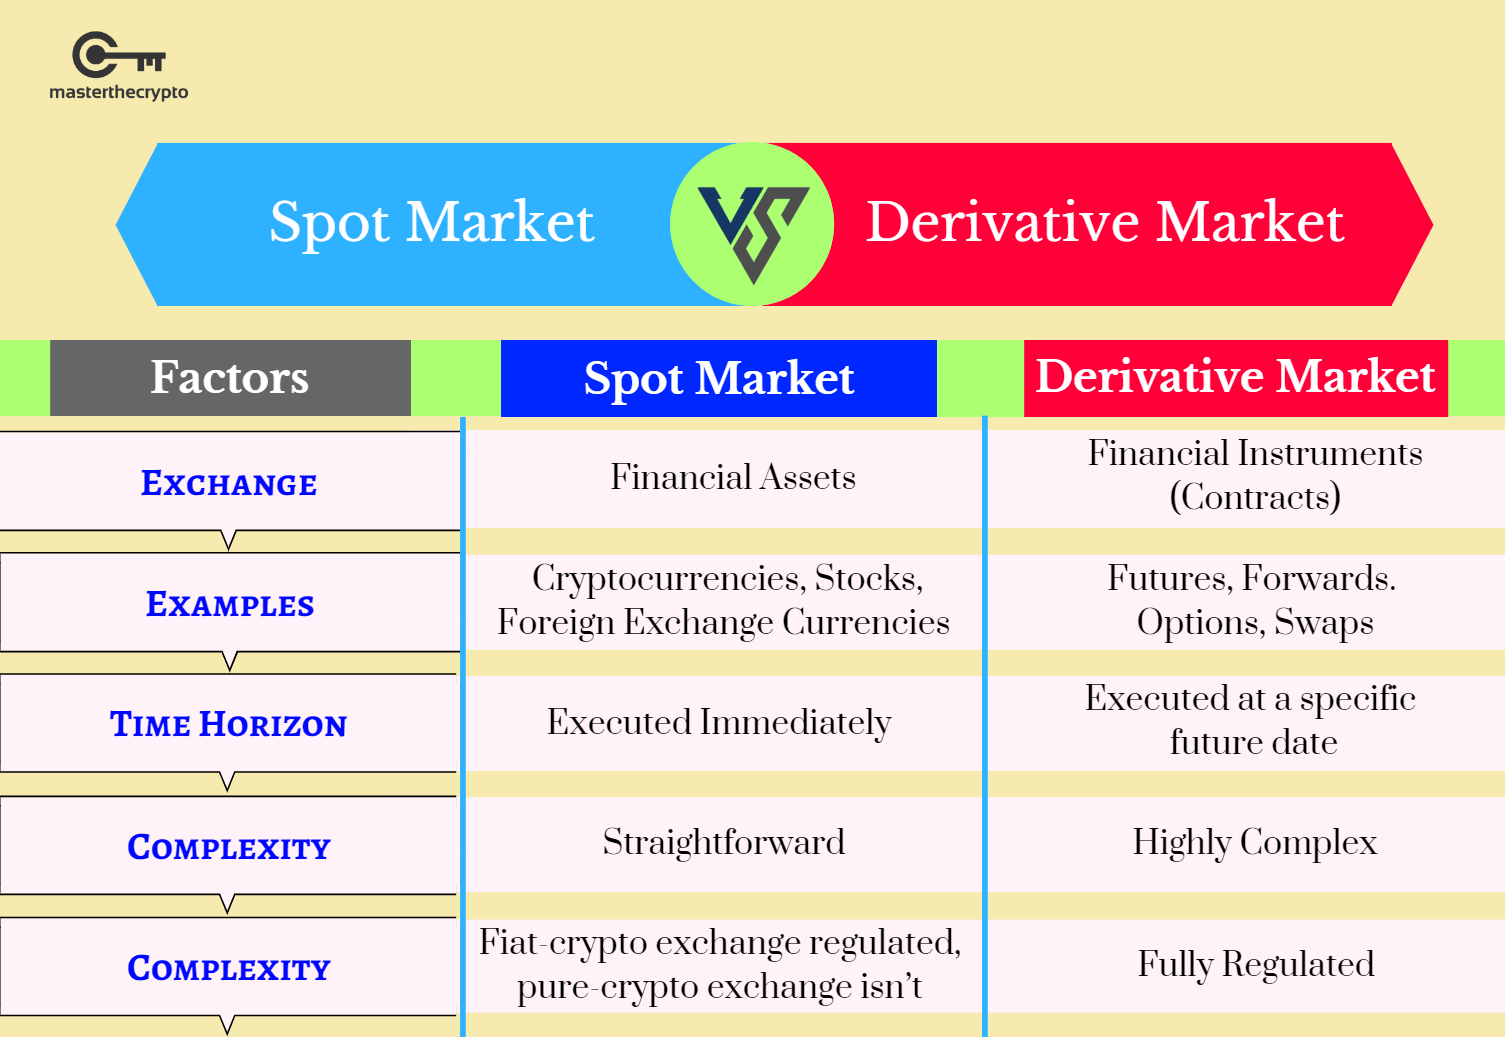 Guide to Crypto Derivatives: What is Cryptocurrency ...